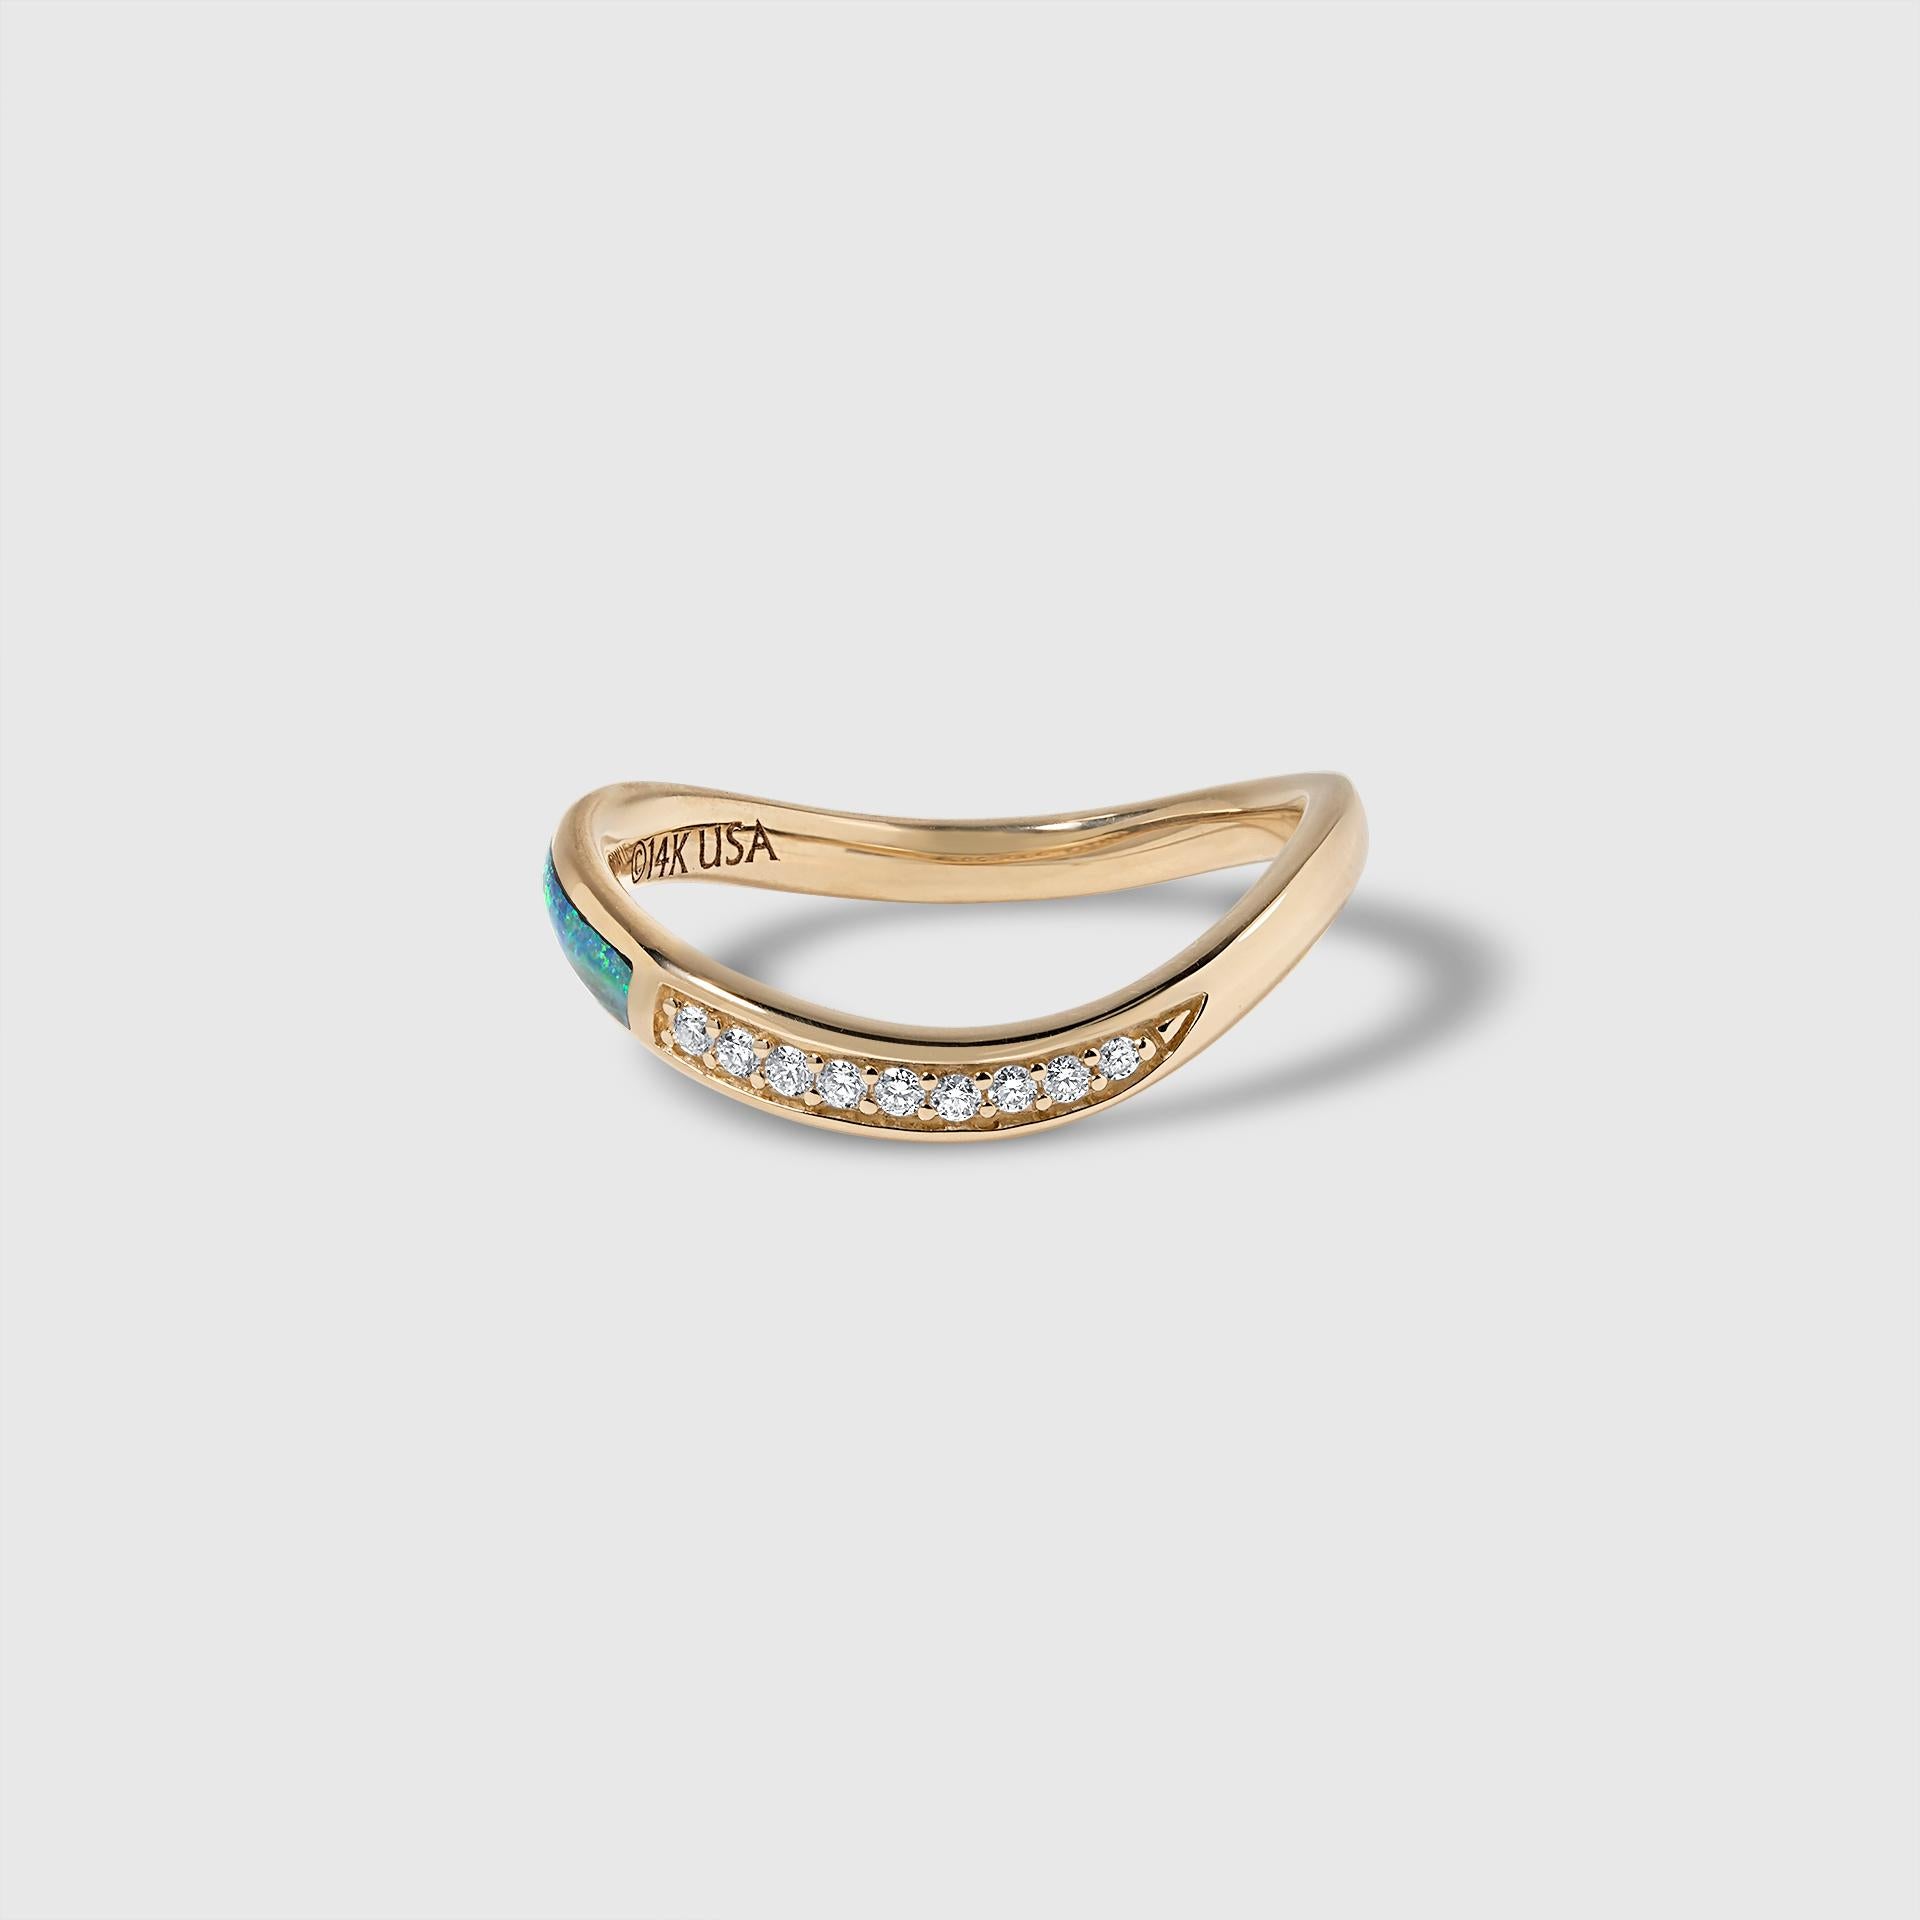 High Grade (Five Star) Australian Opal and Diamond Wavy Stacker Ring, 14kt Gold, Size 7.  Custom sizes are available.

All designs may be custom-ordered in many of Kabana’s stones, including: sleeping beauty turquoise, turquoise, four-star opal,